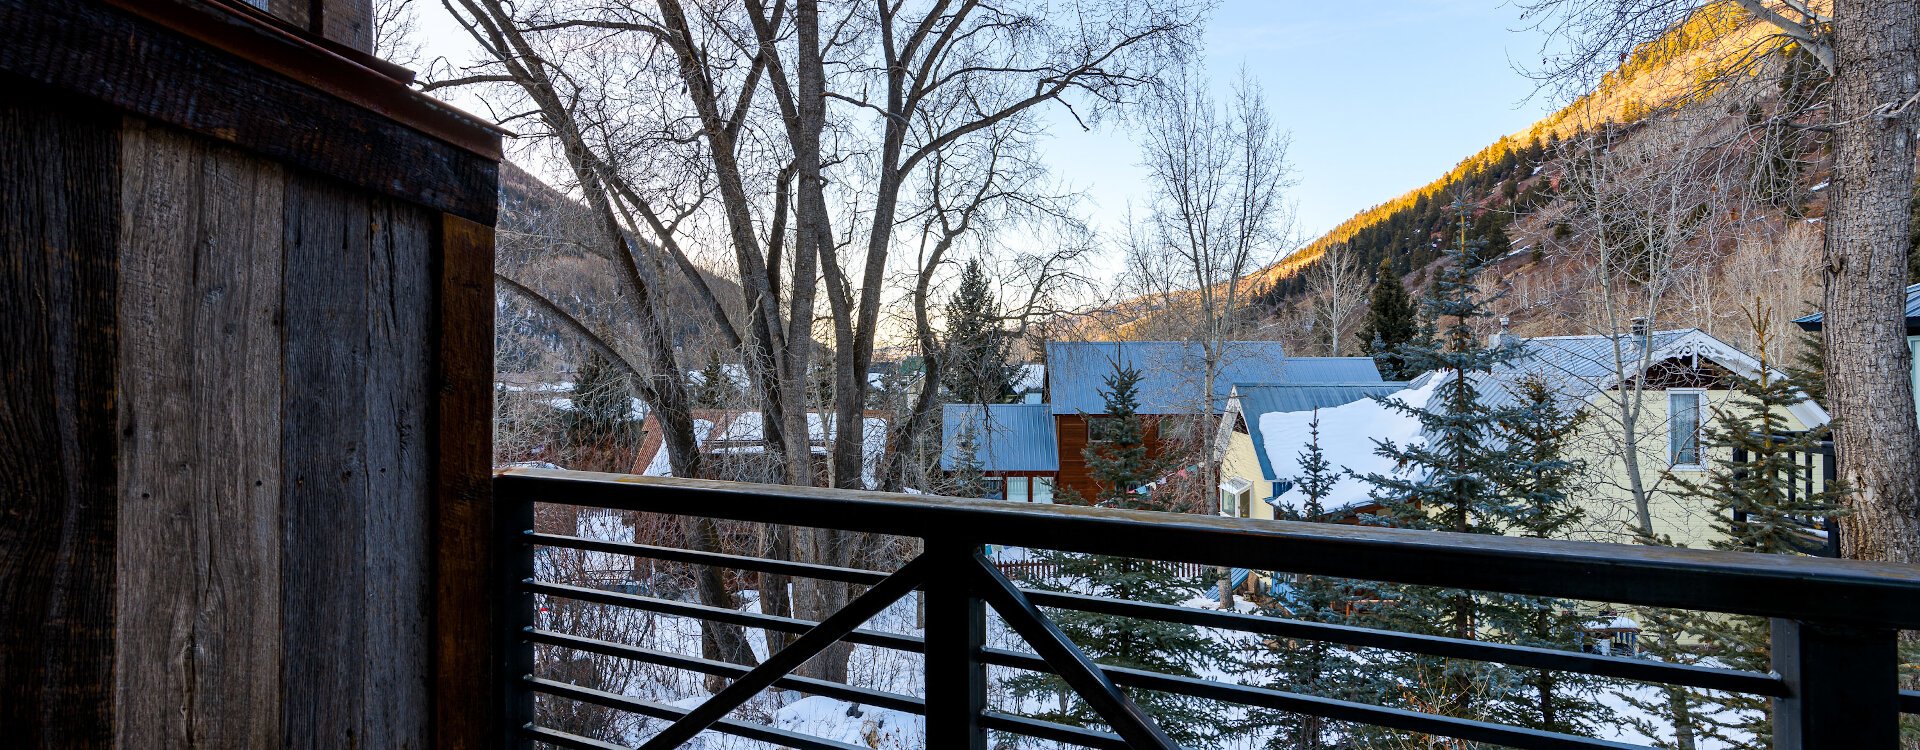 7.02-telluride-the-treehouse-guest-suite-2-deck